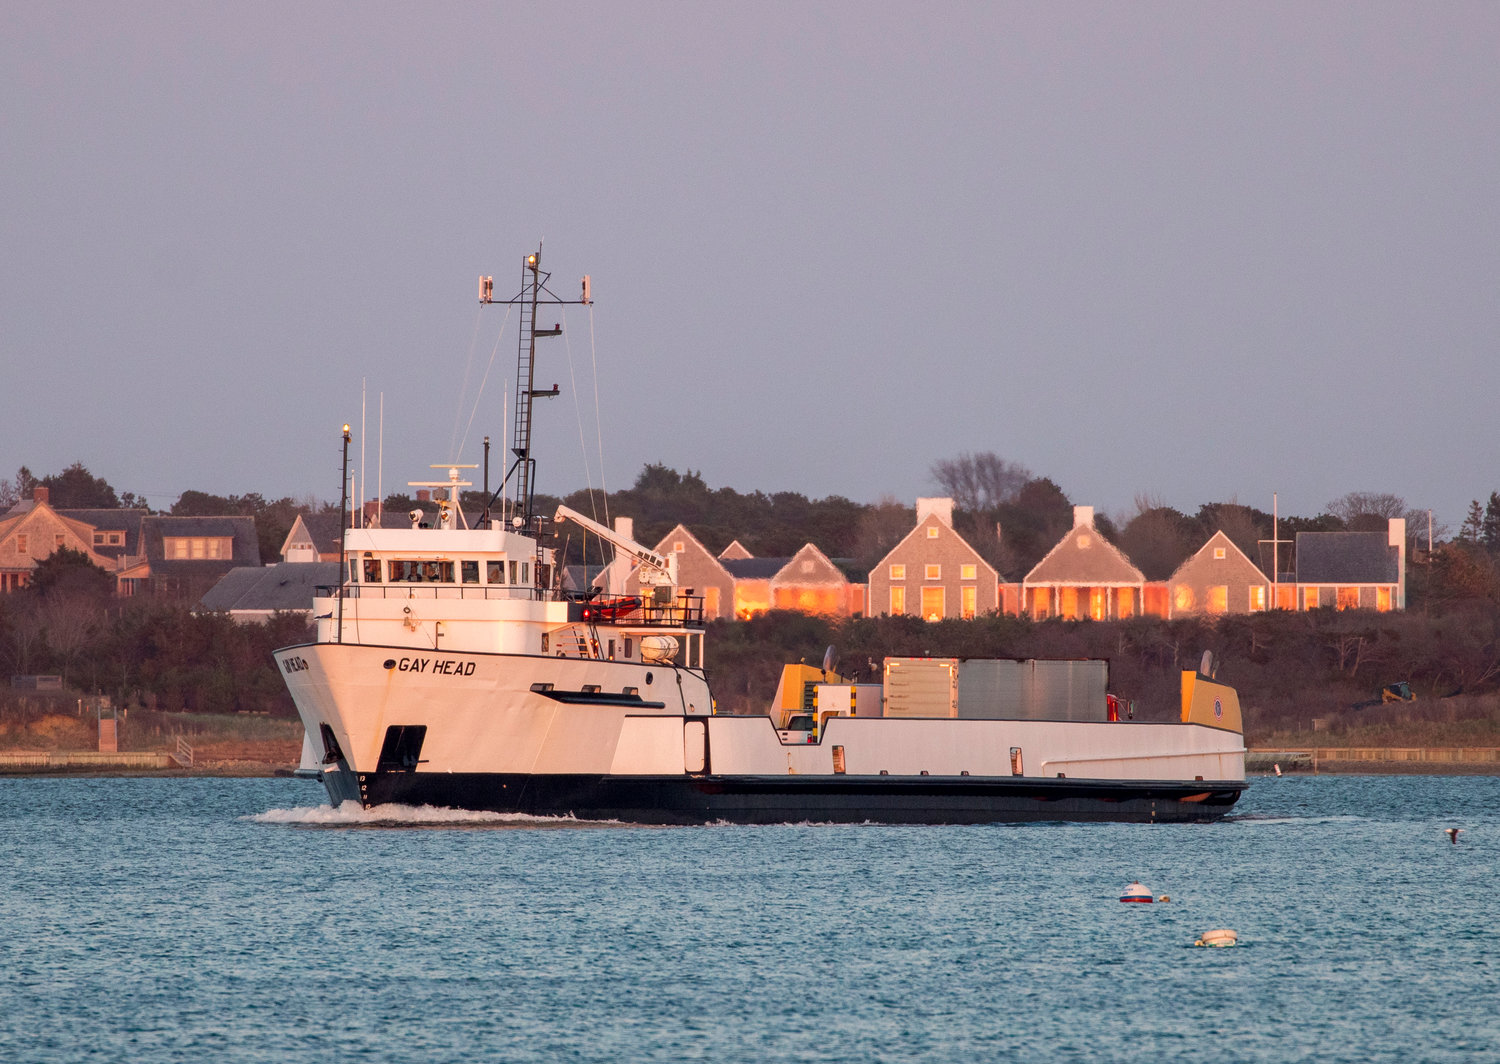 Photo by Nicole Harnishfeger.The freight boat Gay Head leaves Nantucket Harbor.